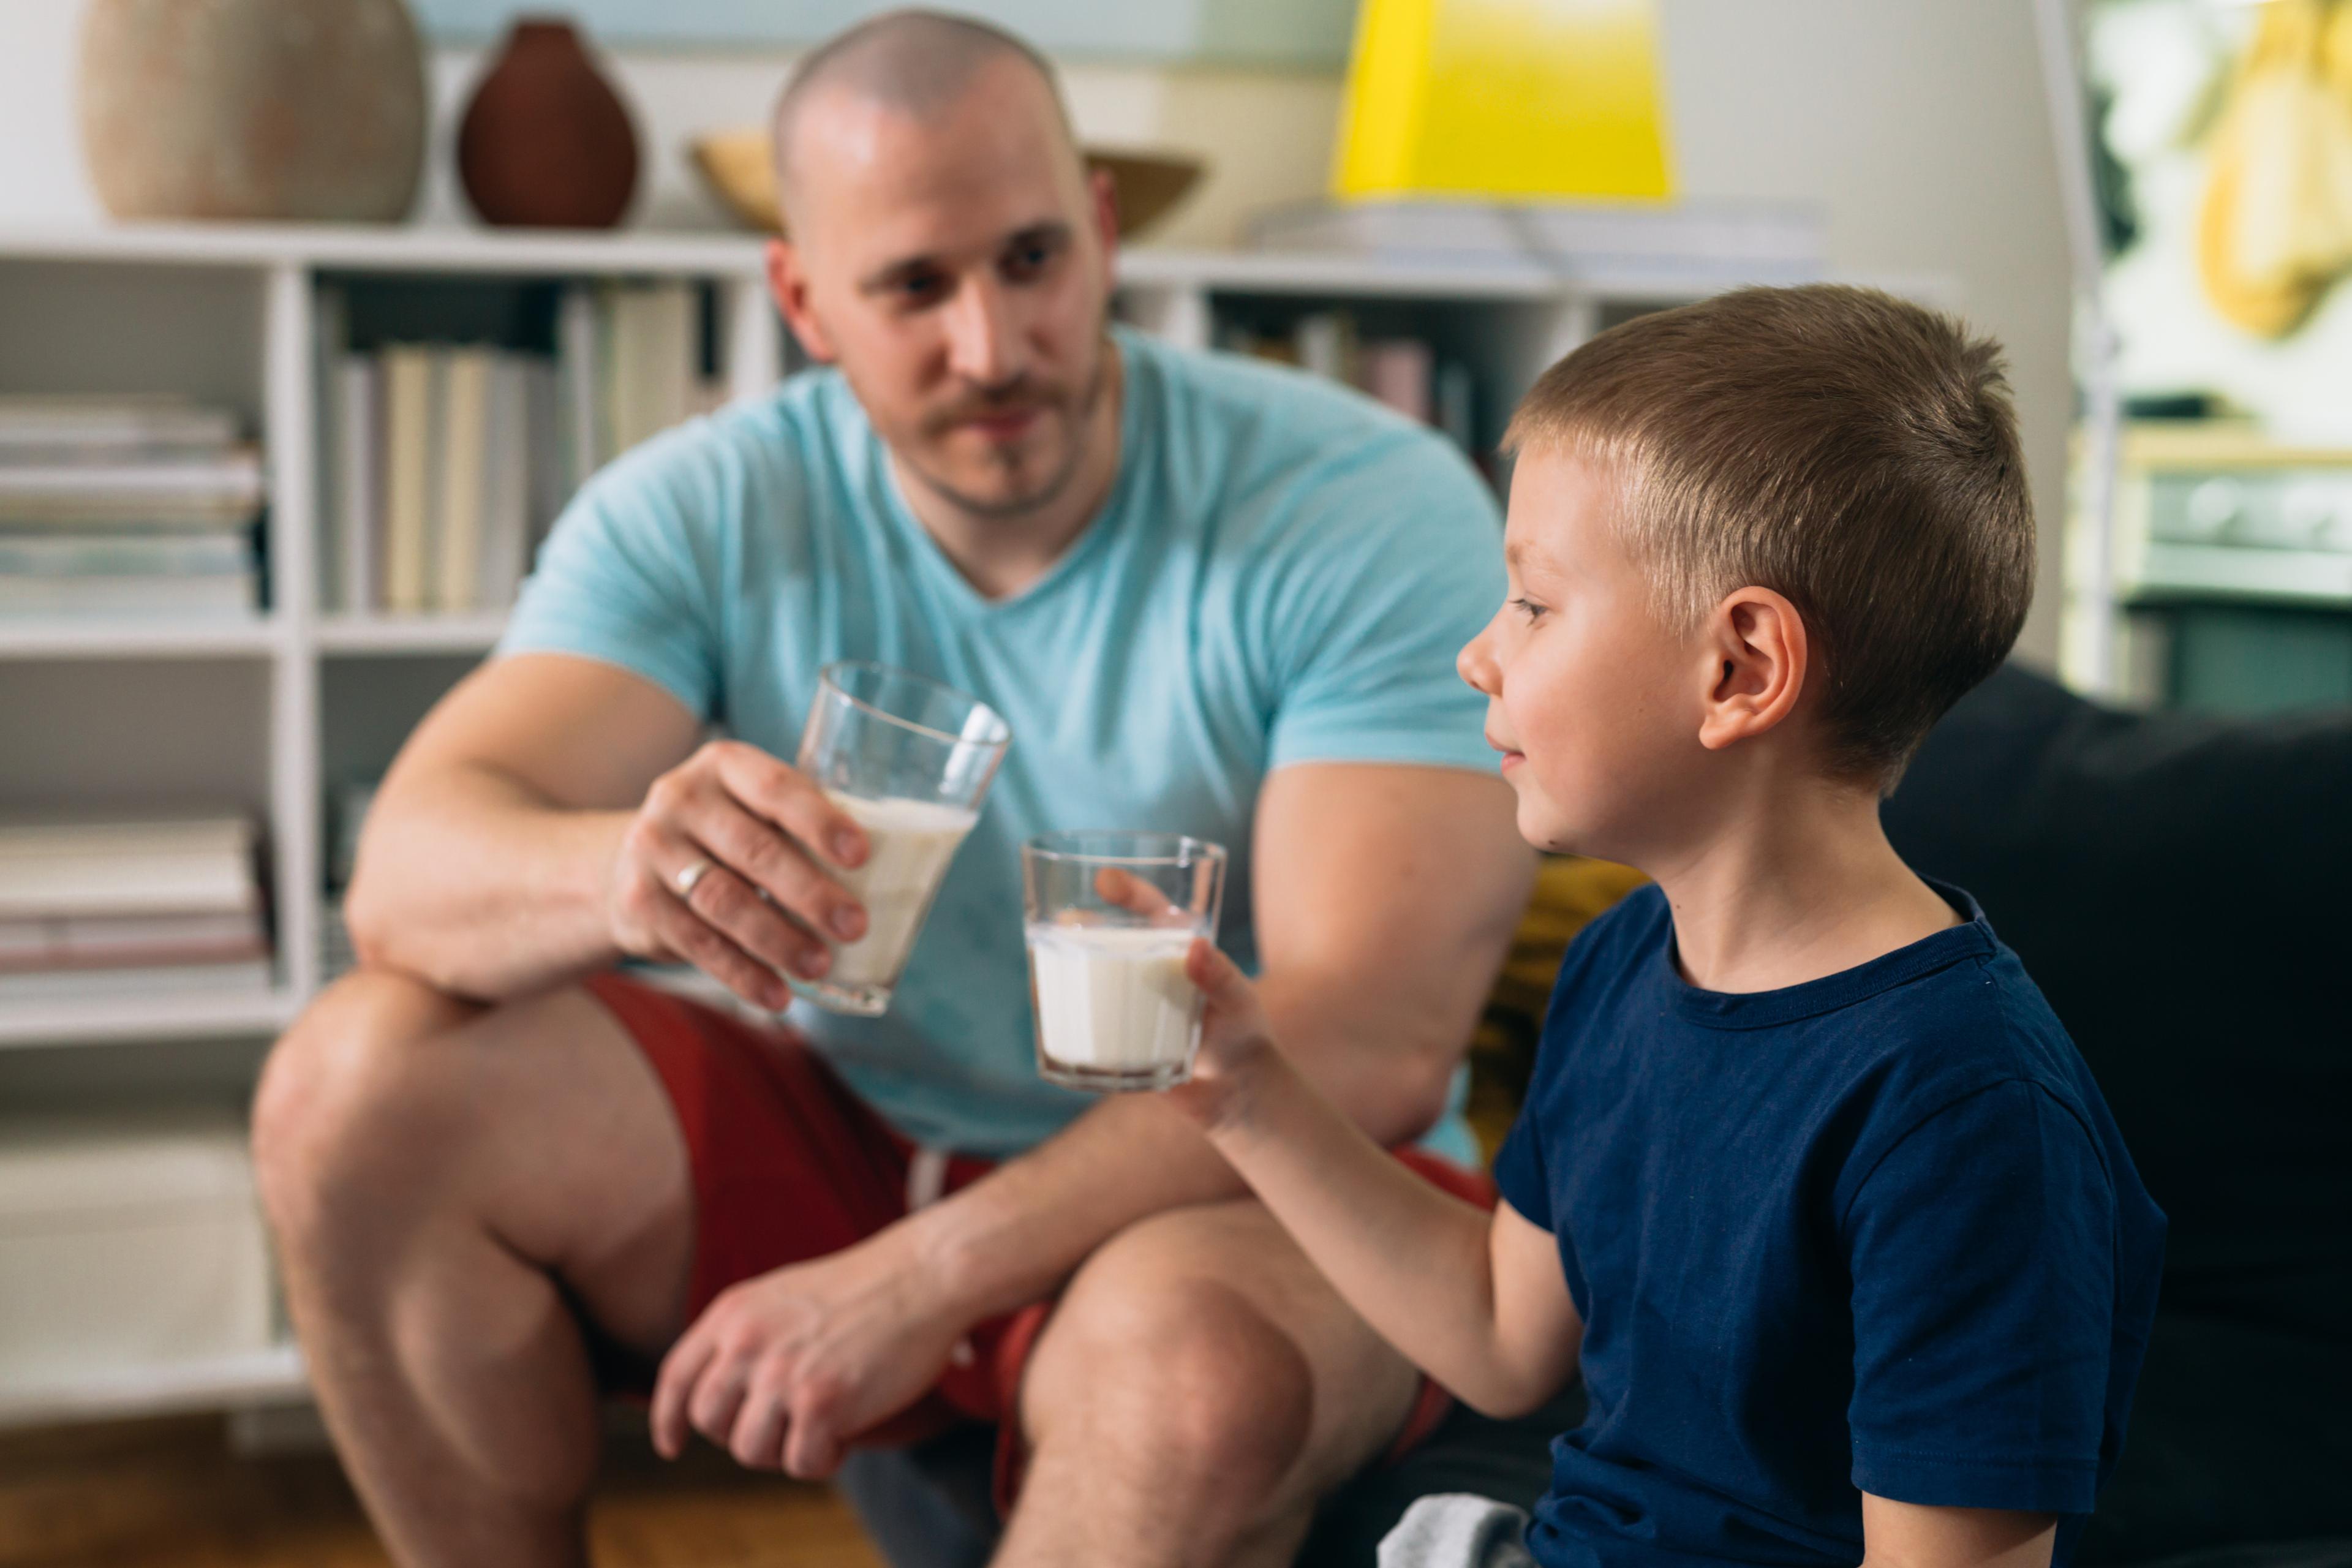 A dad and son drink milk in their living room.